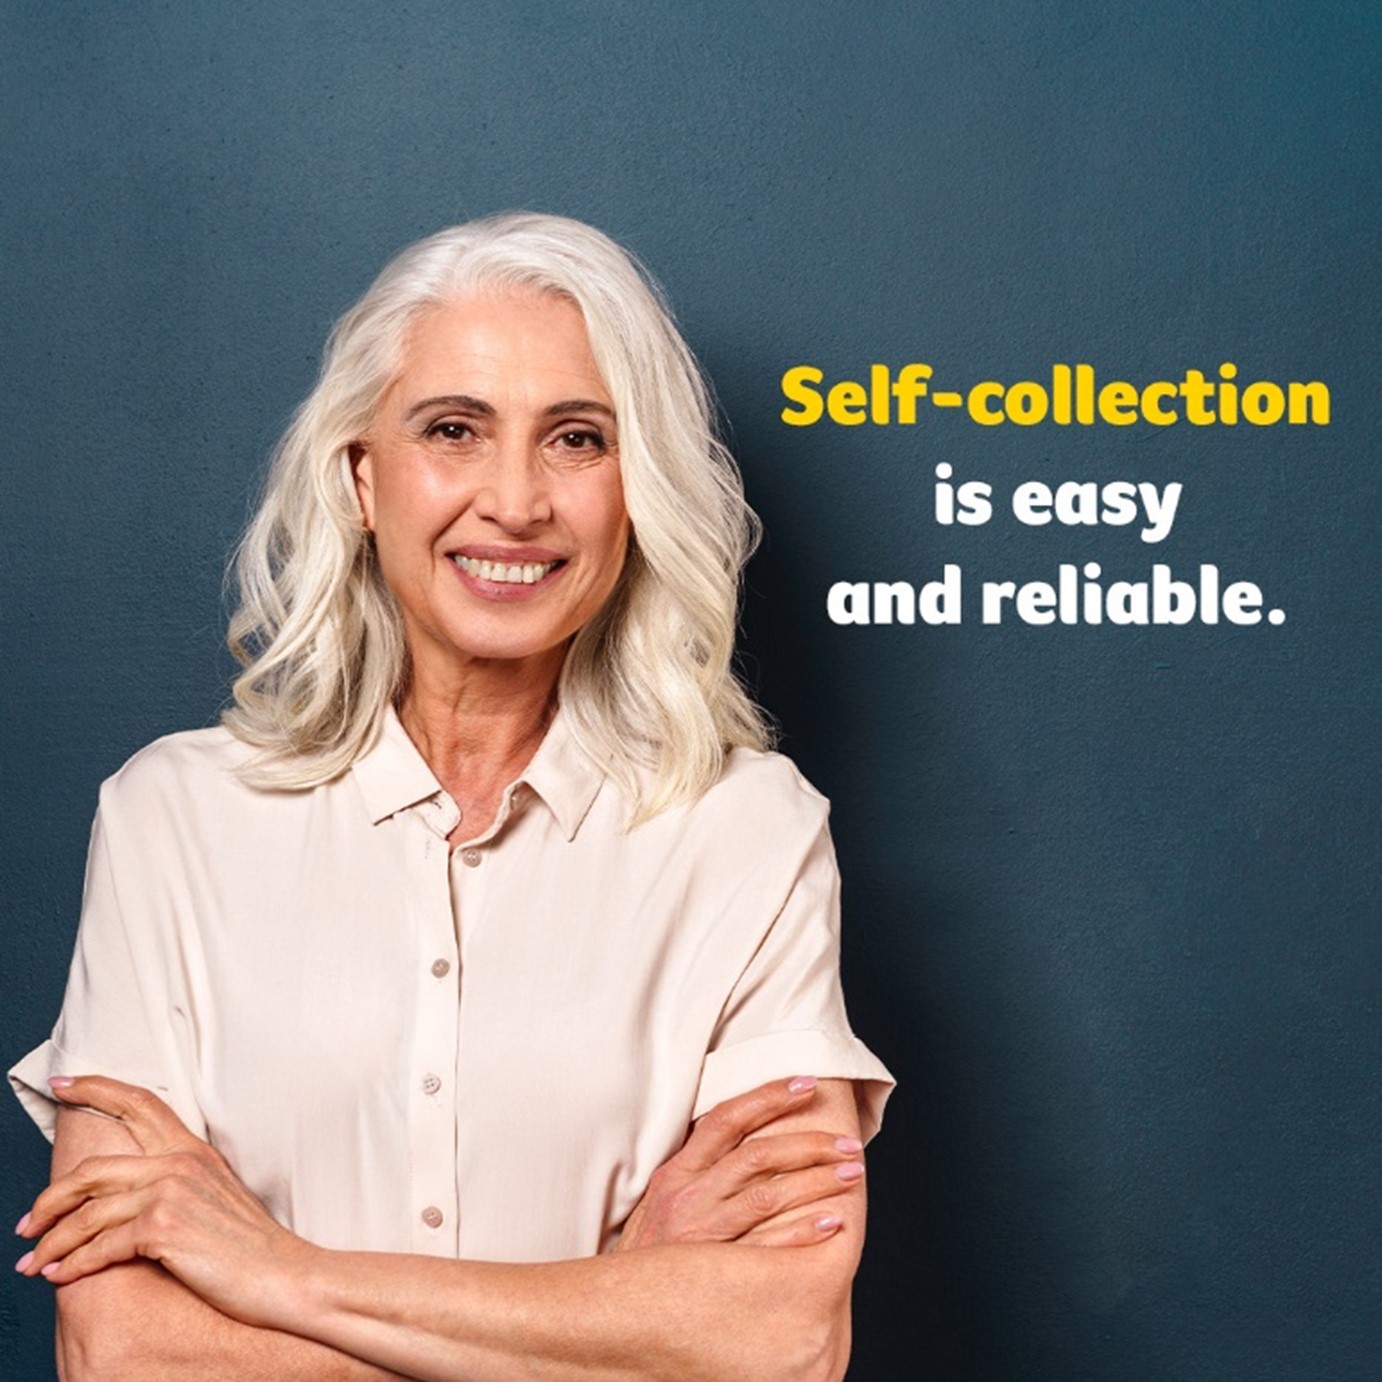 Self-collection is easy and reliable